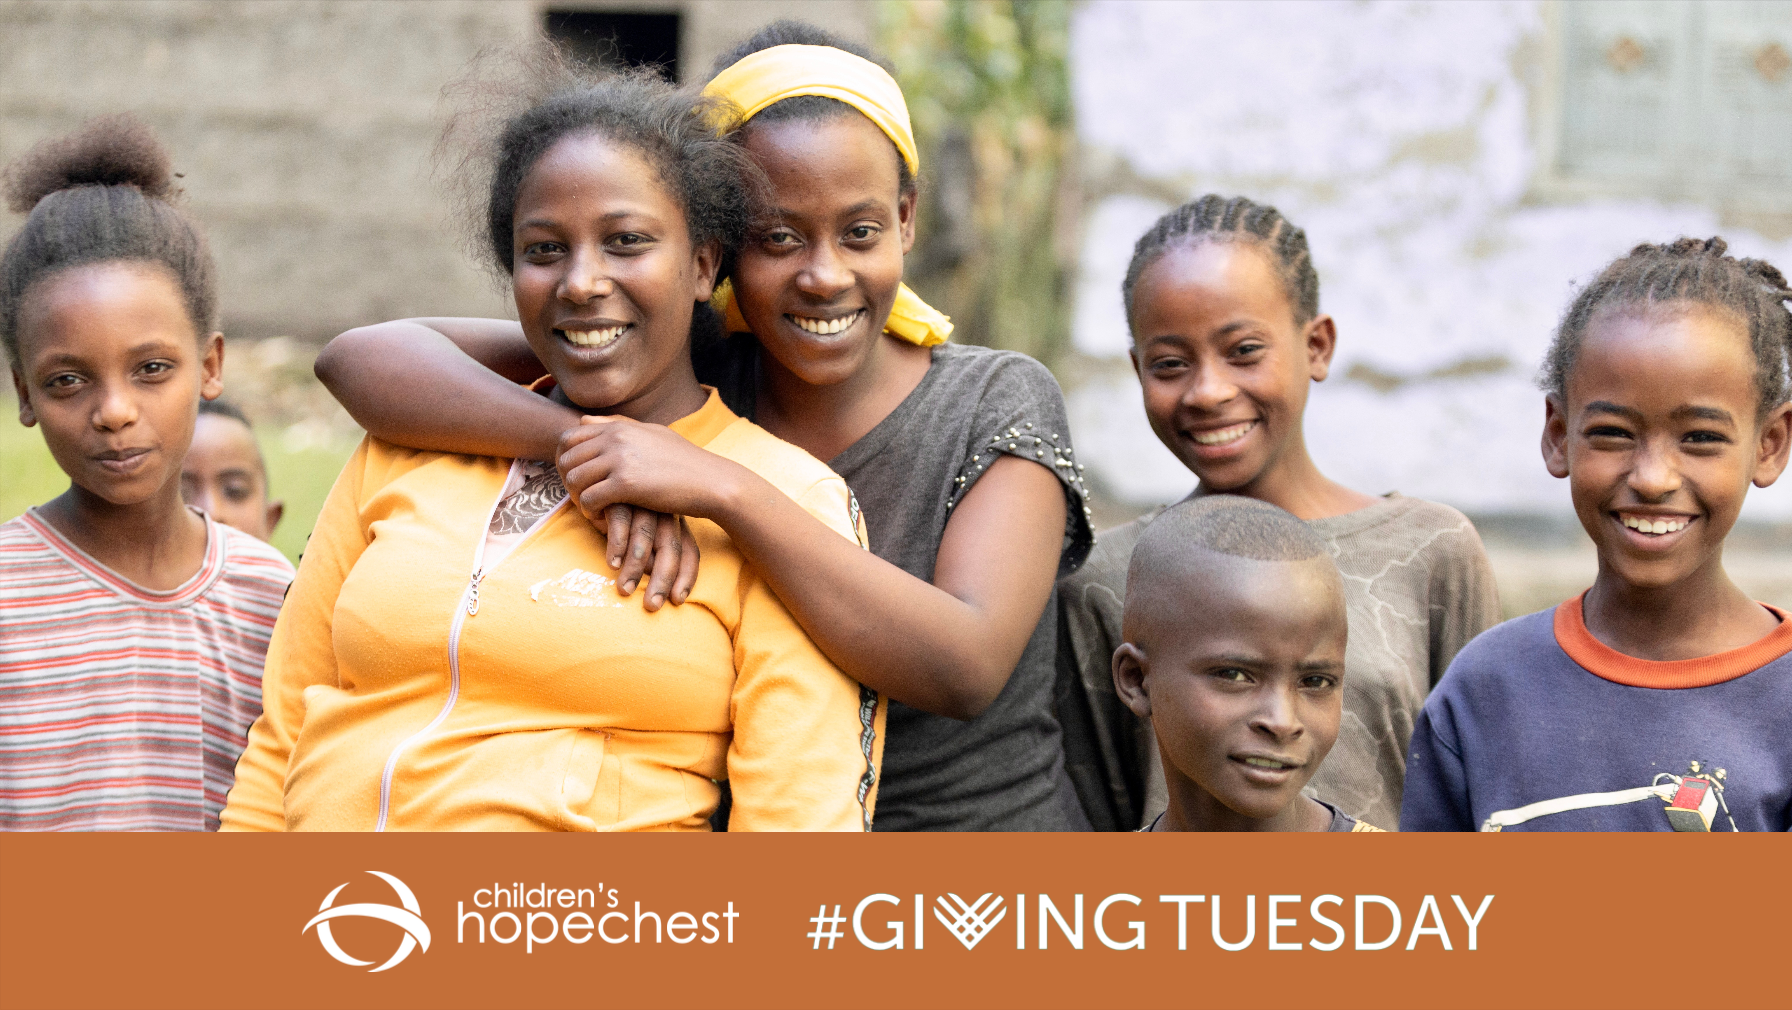 #GivingTuesday: 5 Ways That Your Giving Can Ignite Hope